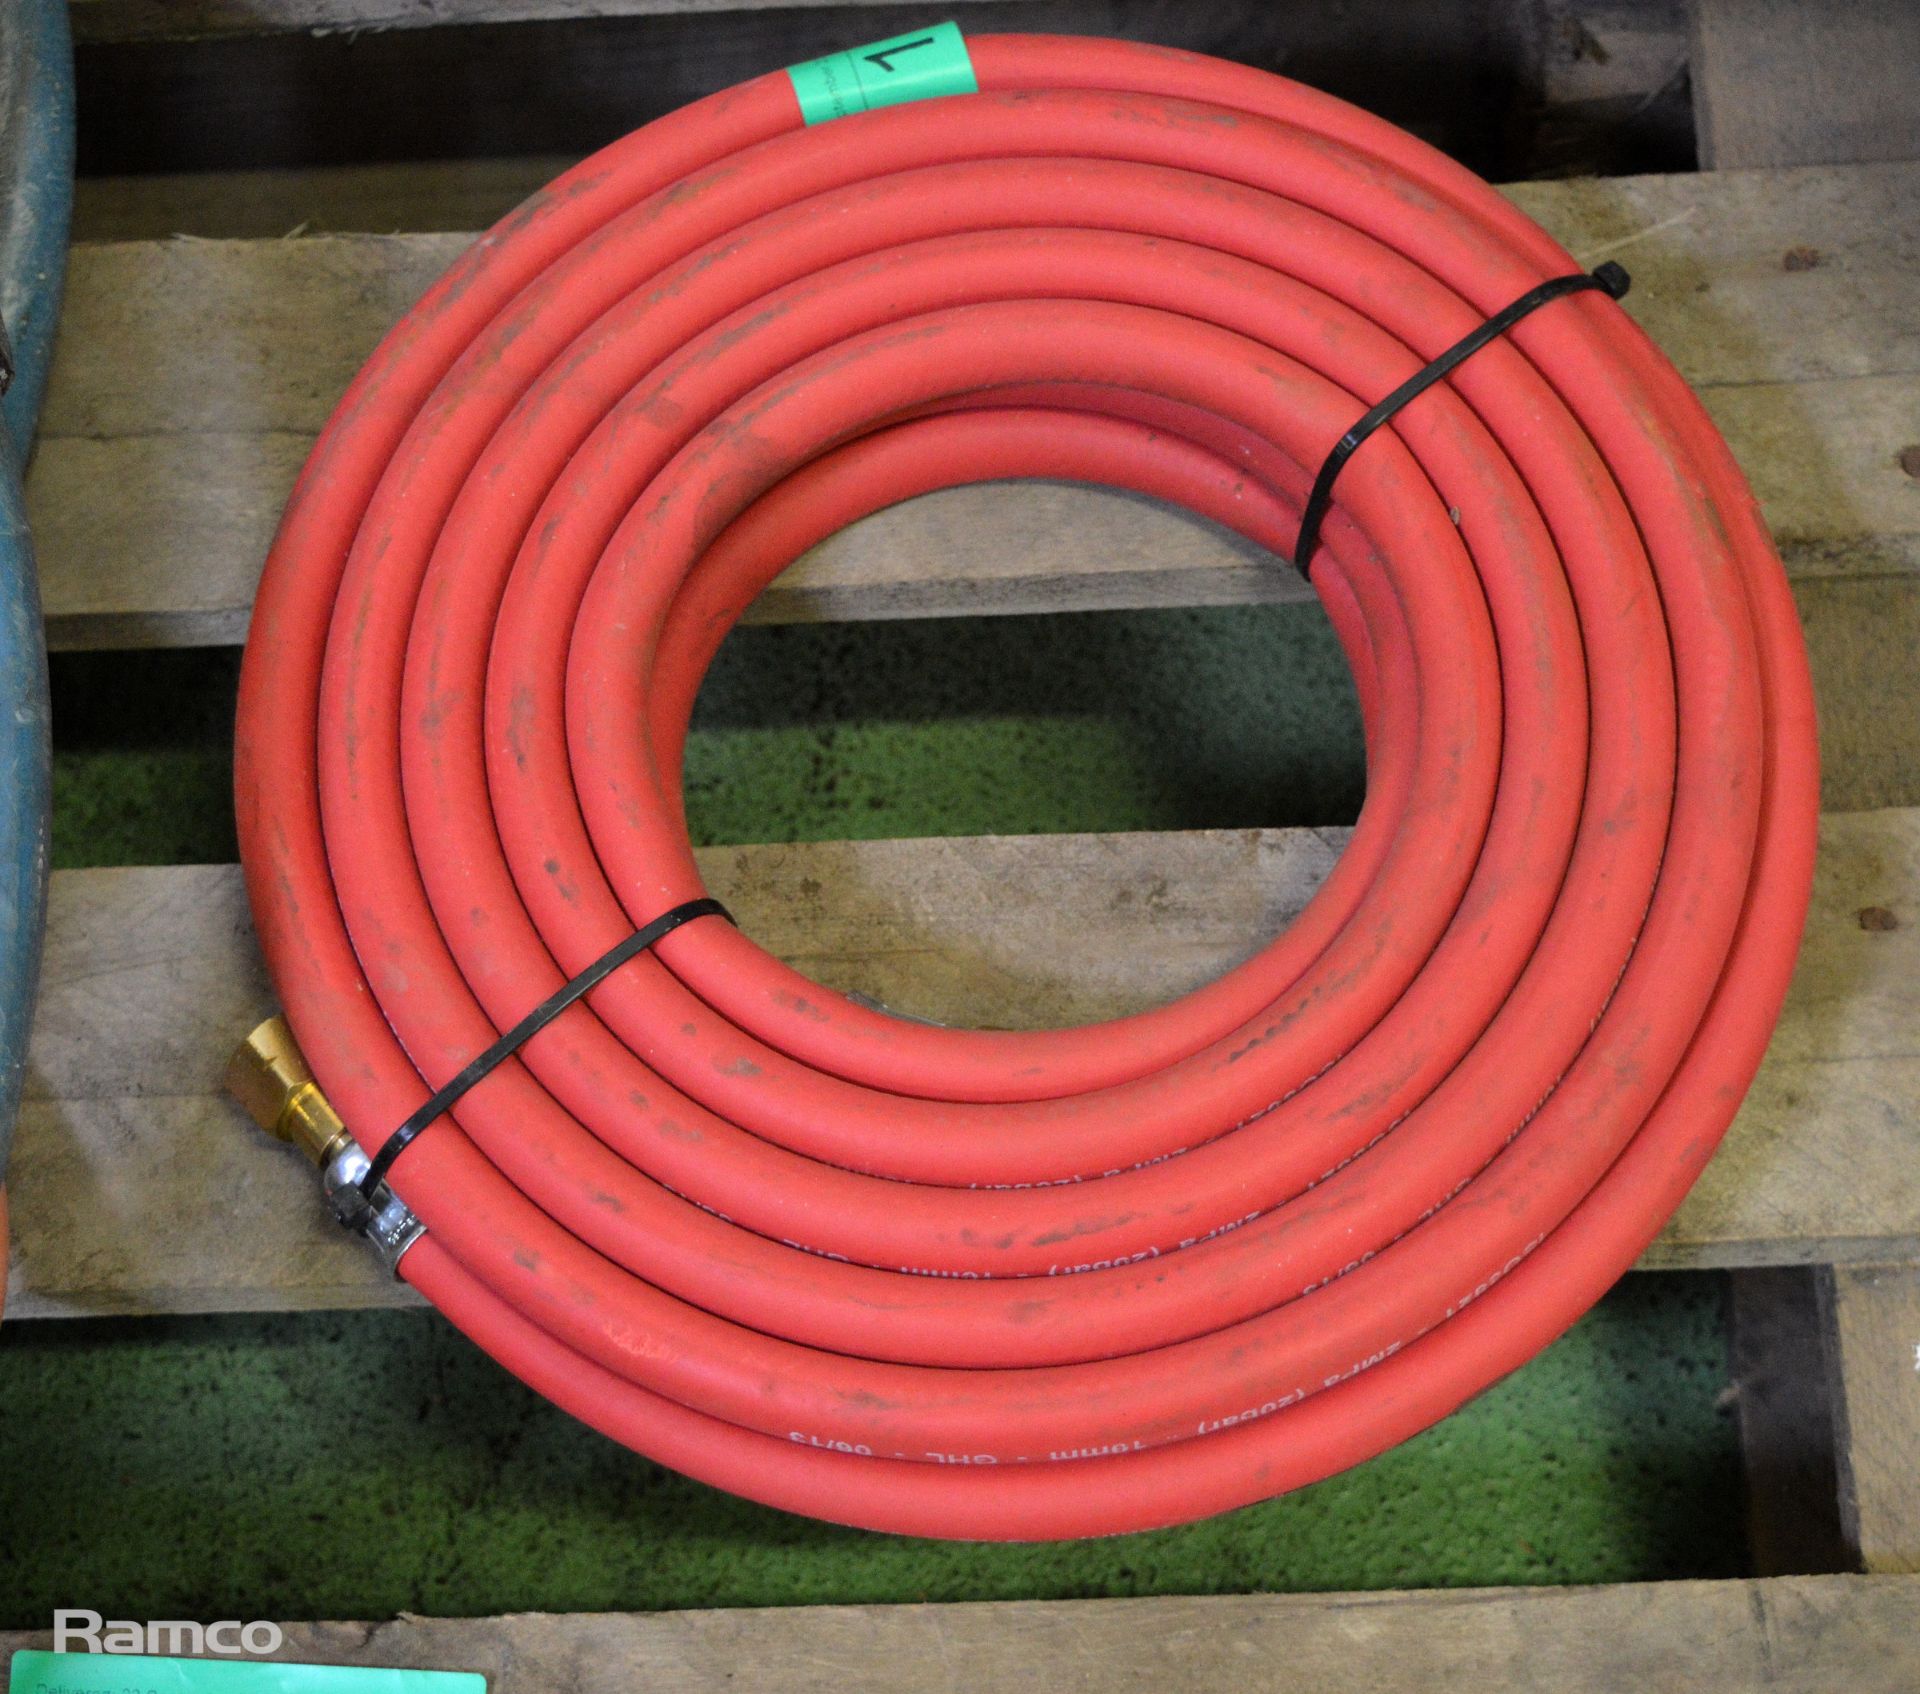 3x Oxy-Acetylene Lines and Connectors - Image 4 of 5